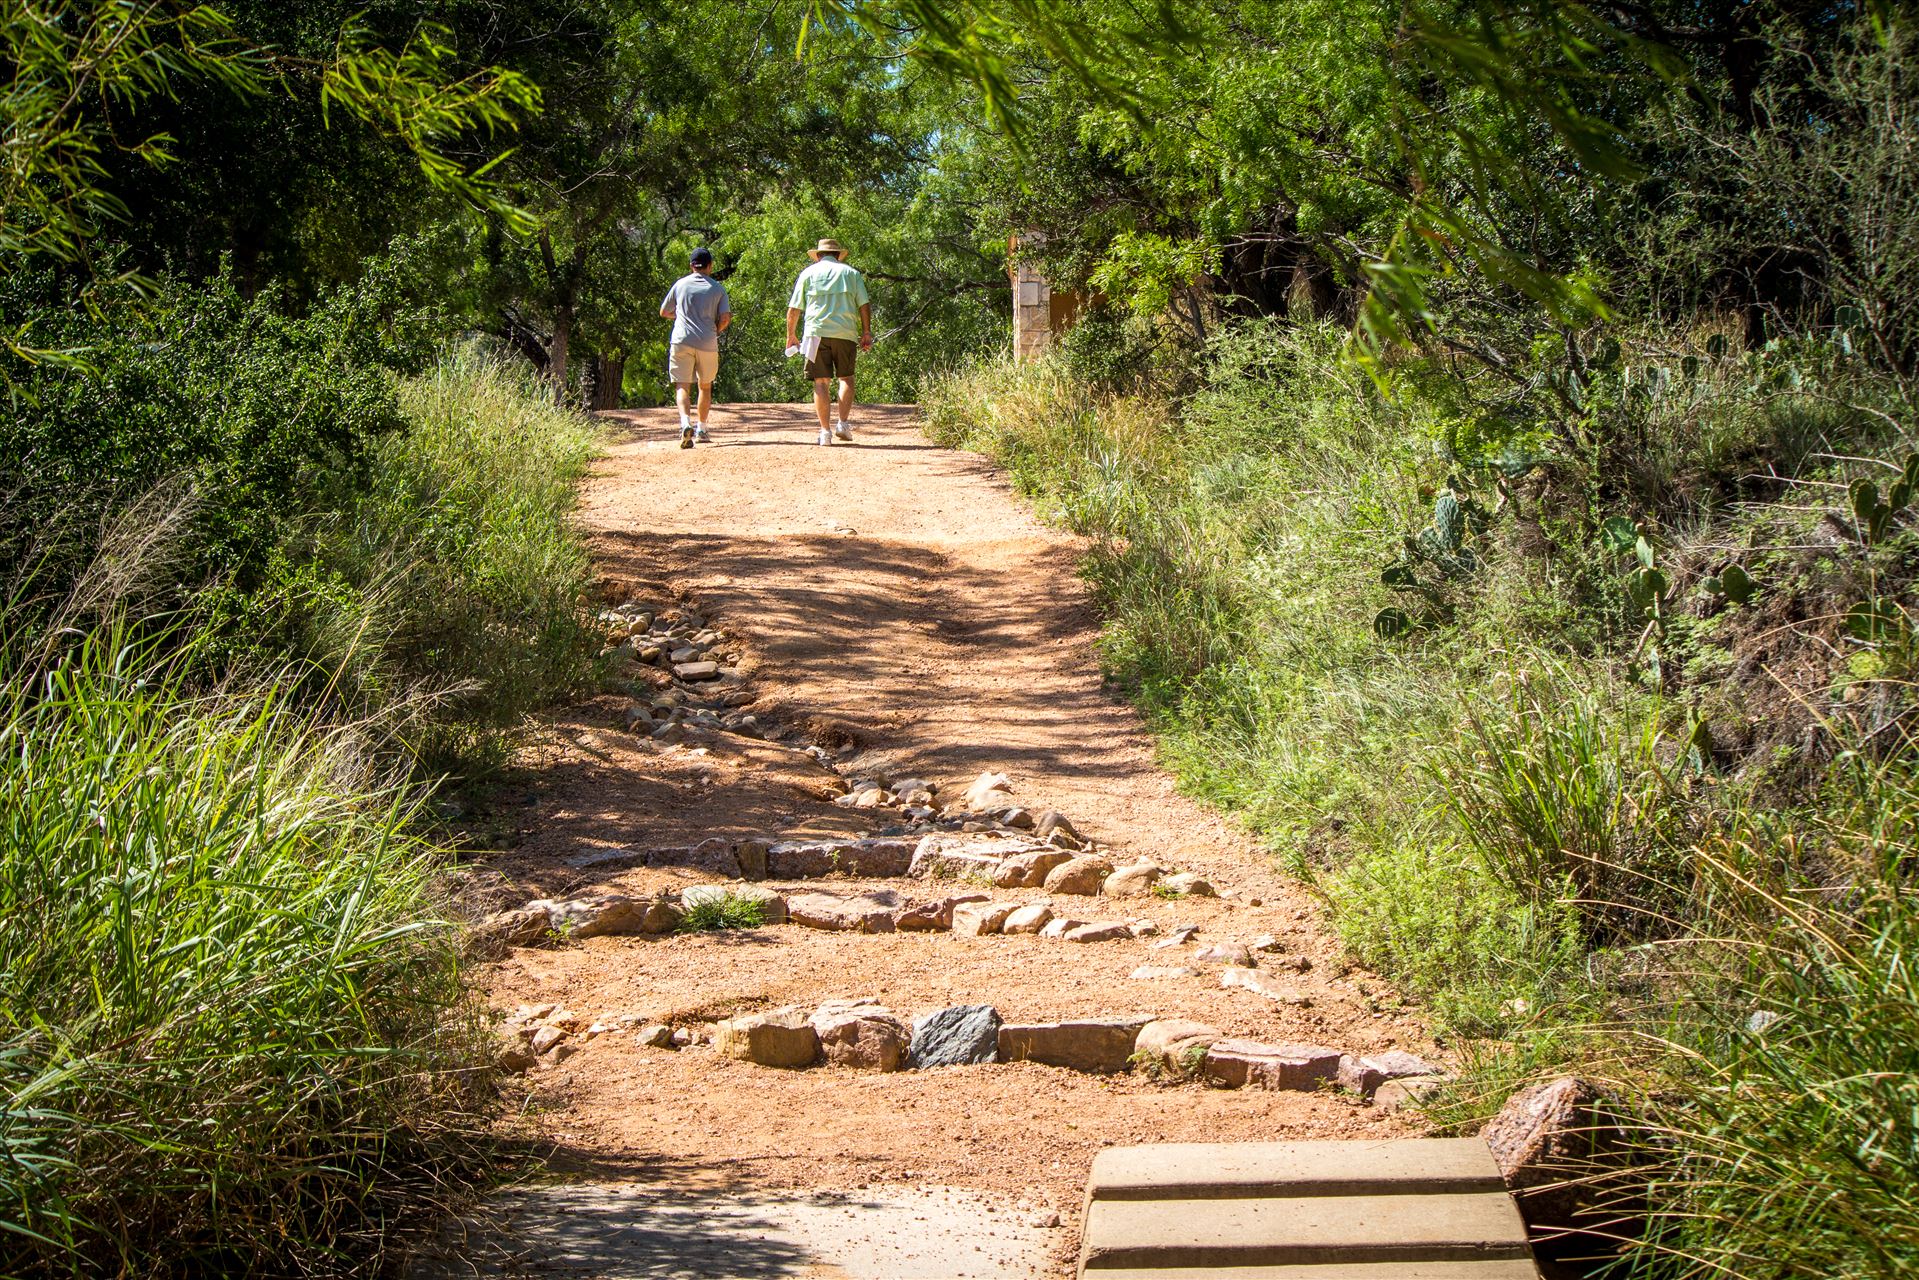 20130723-Enchanted Rock-DSLR-004.jpg  by Charles Smith Photography